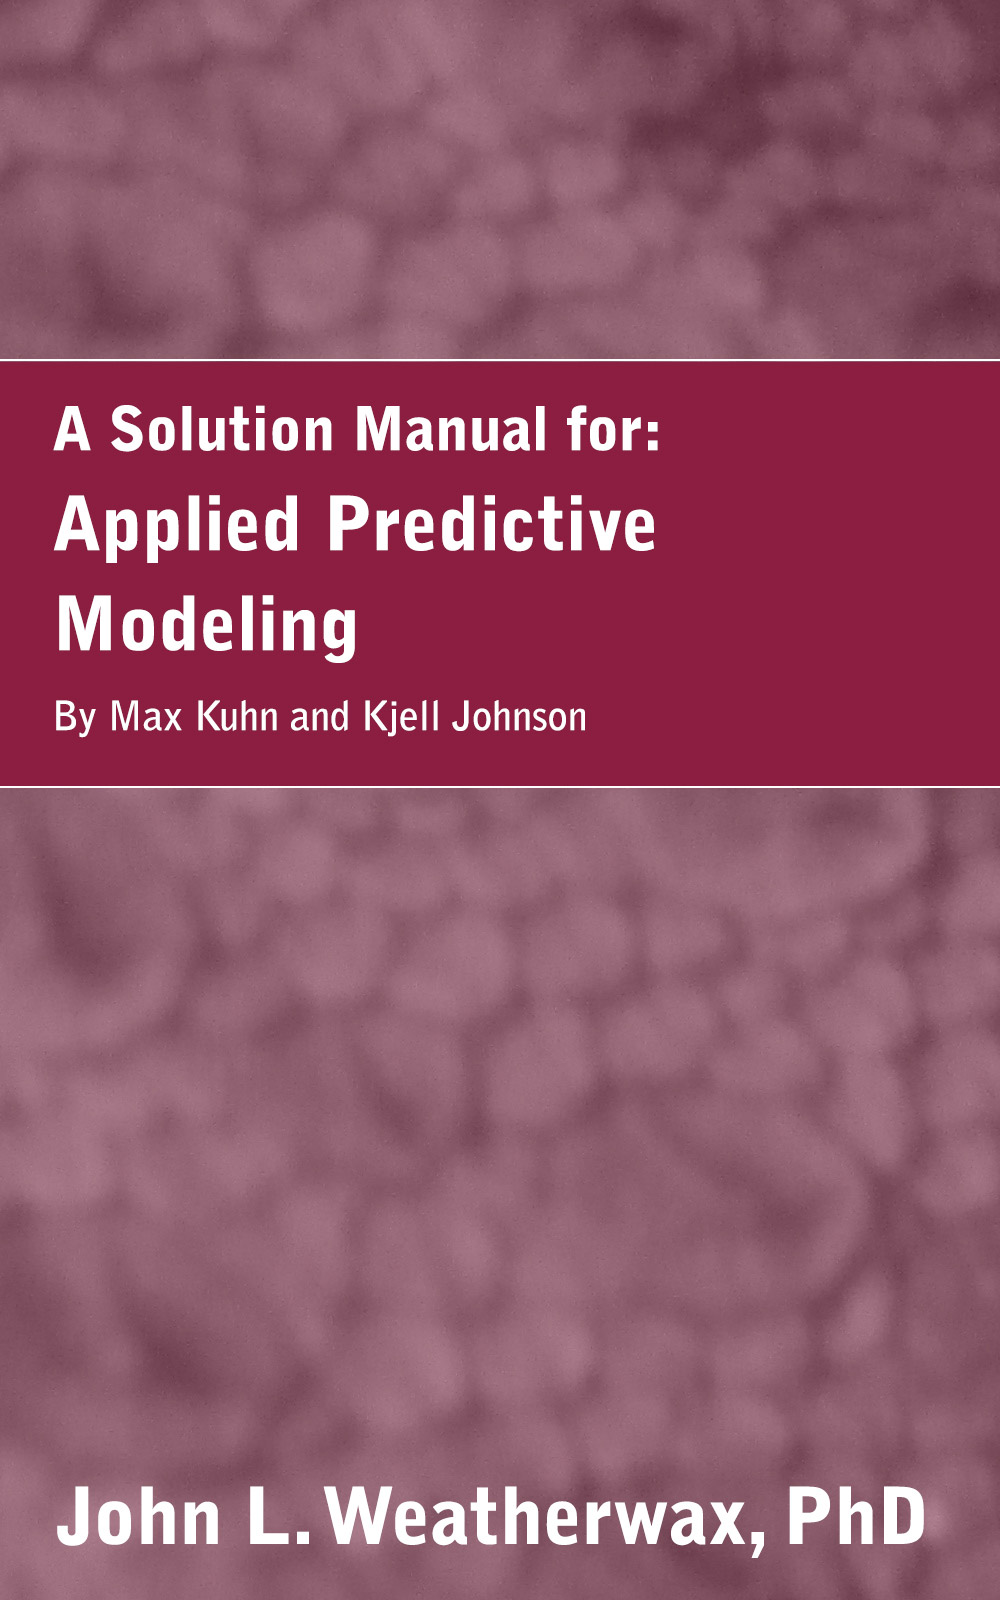 A Solution Manual for: Applied Predictive Modeling